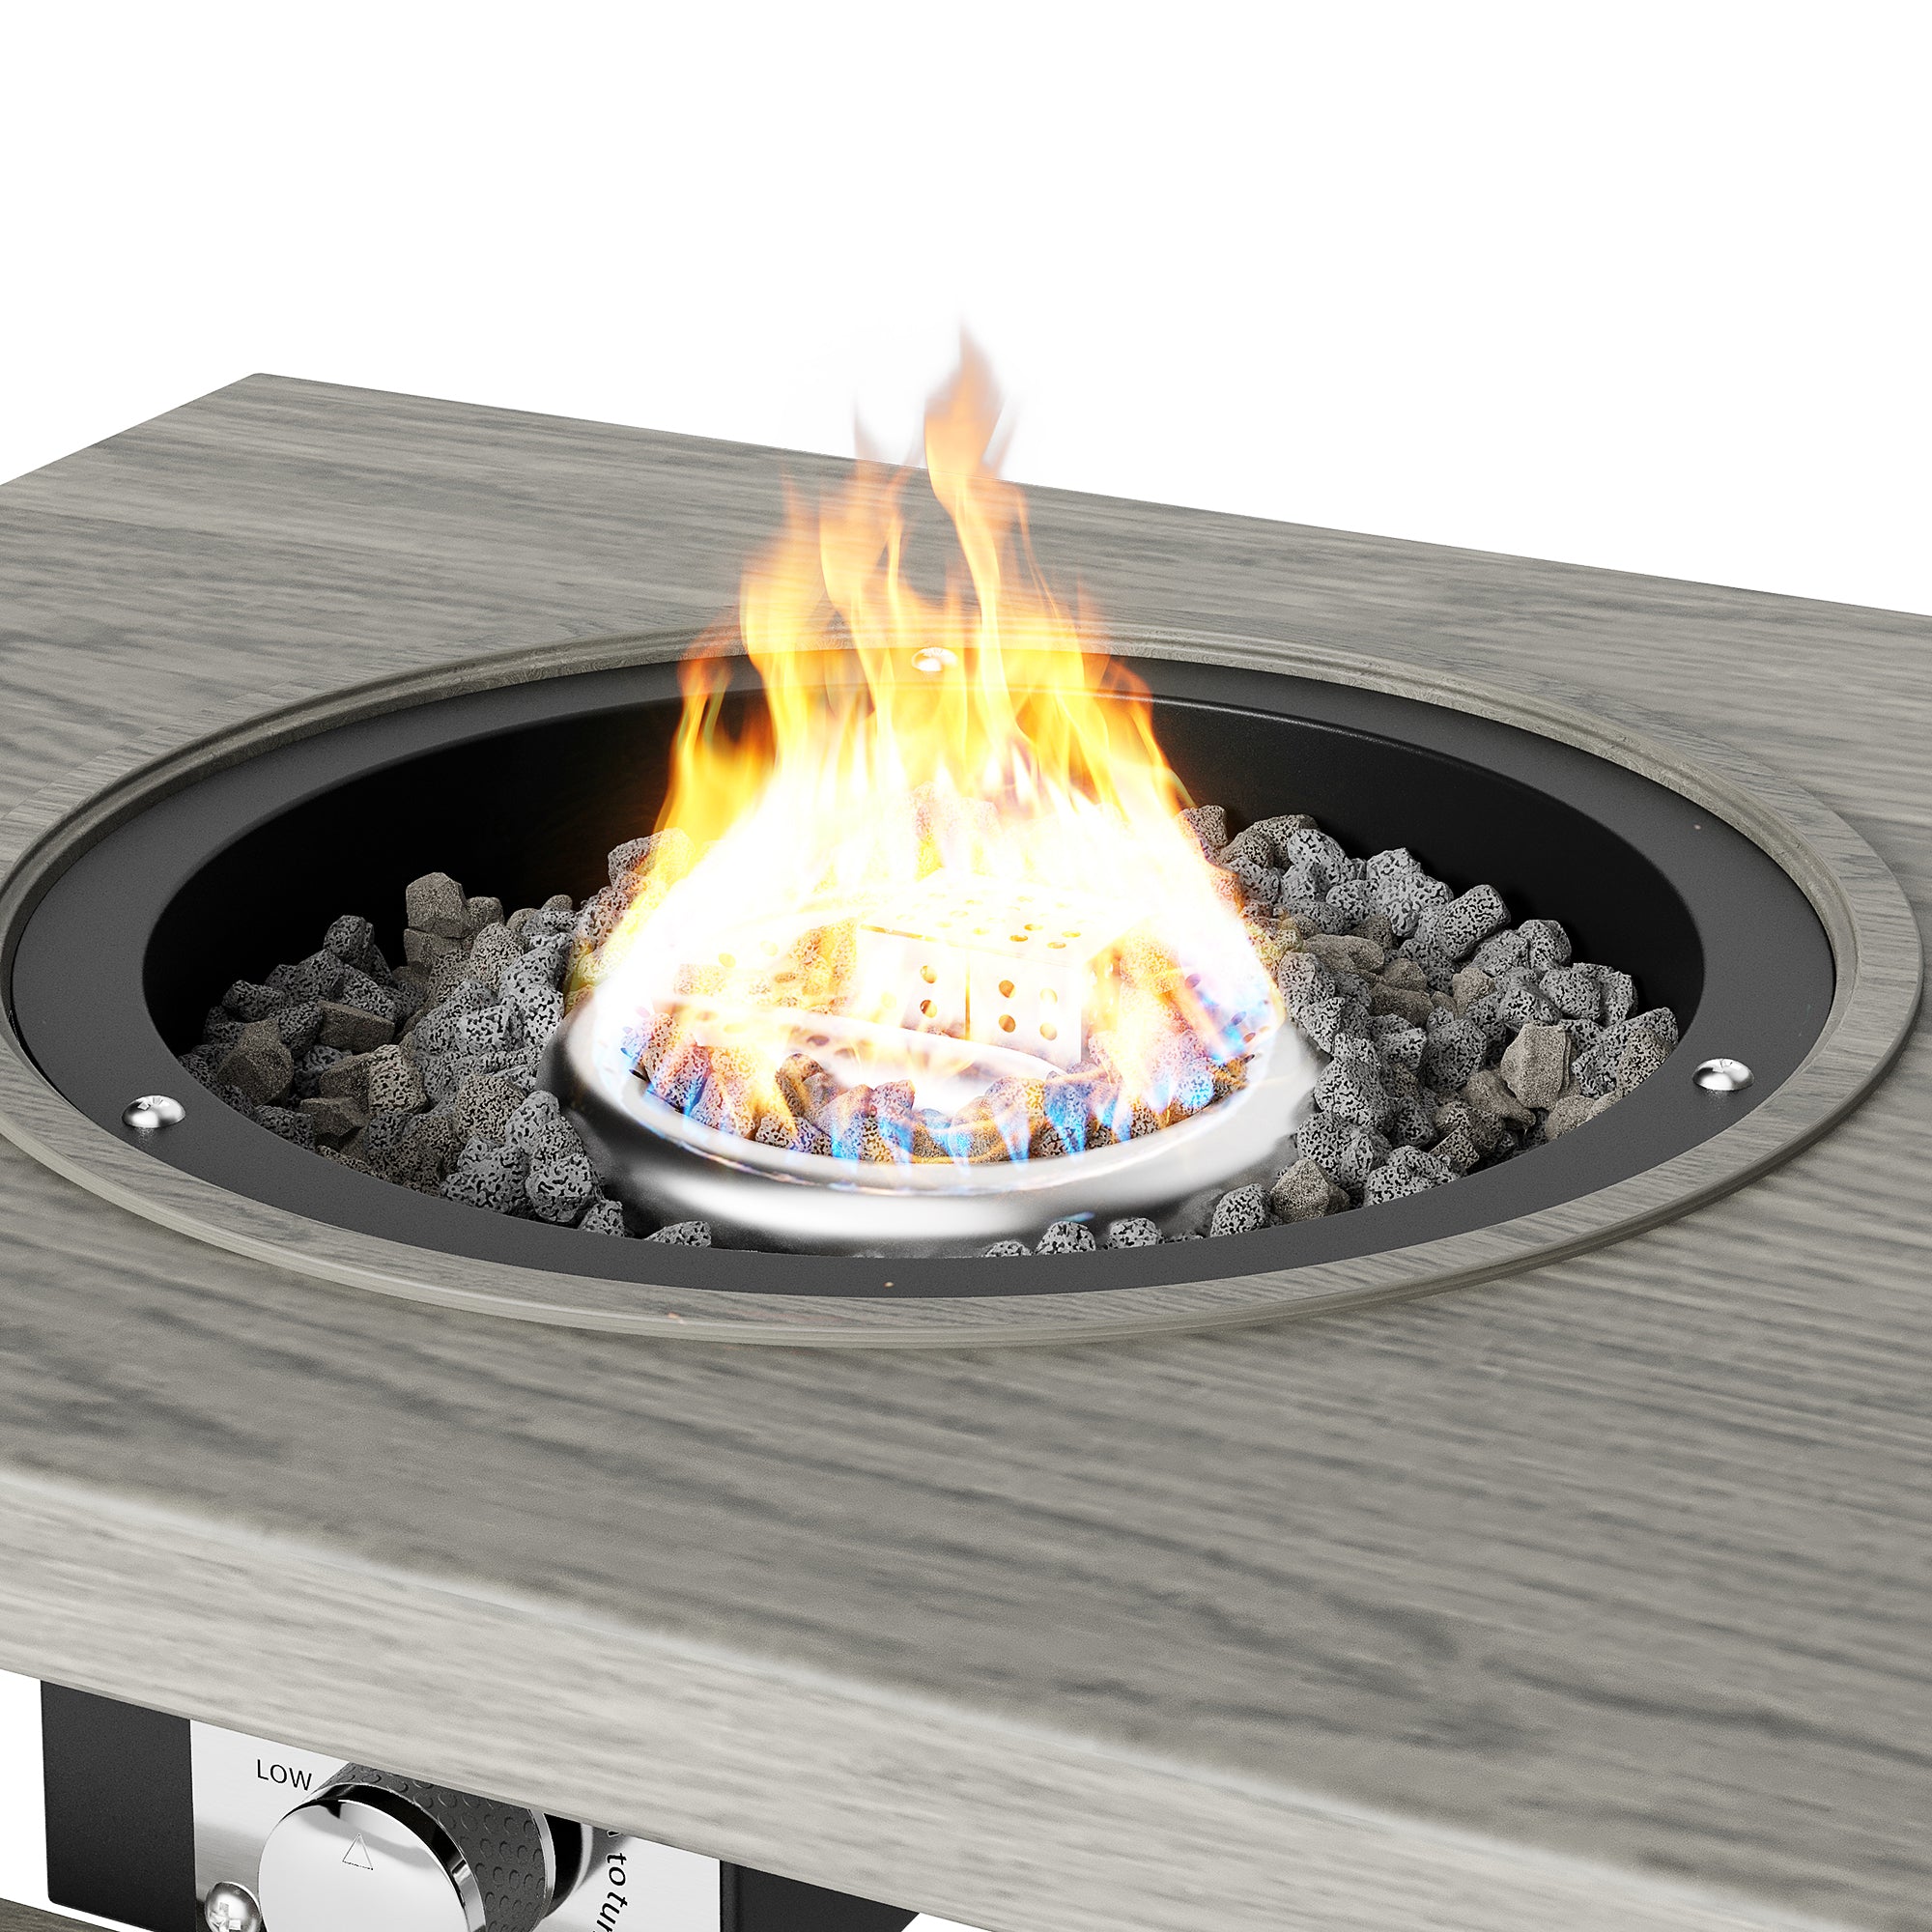 3 in 1 Coffee Table with Ice Bucket and Fire Pit Gray gray-aluminium